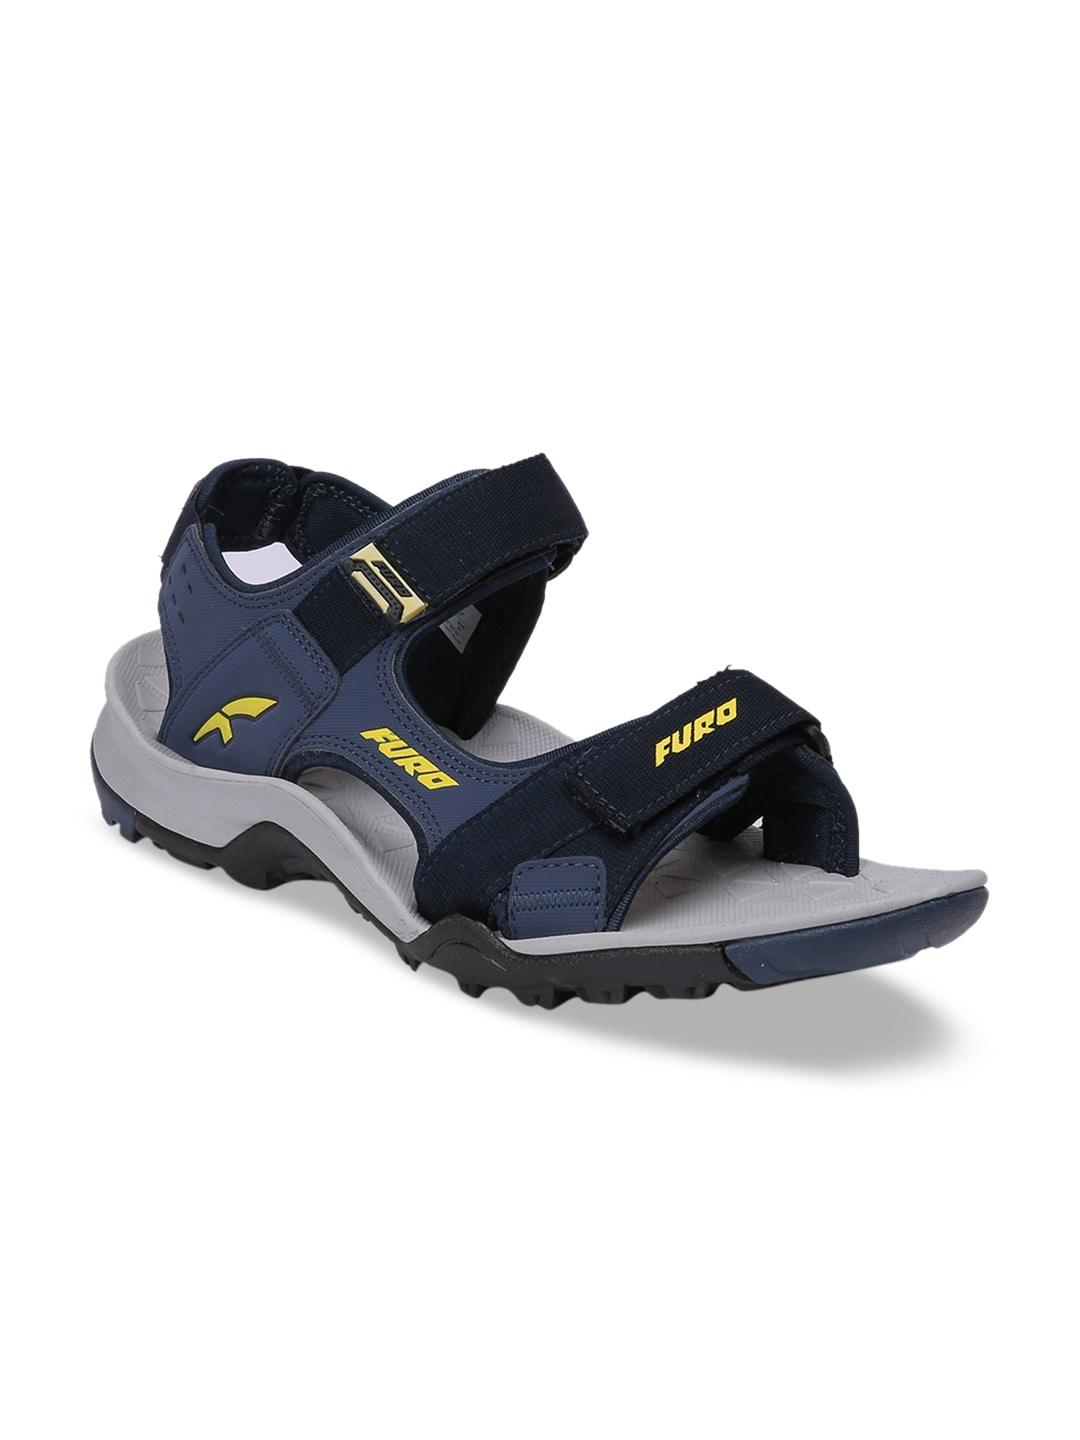 furo-by-red-chief-men-blue-&-black-sports-sandals